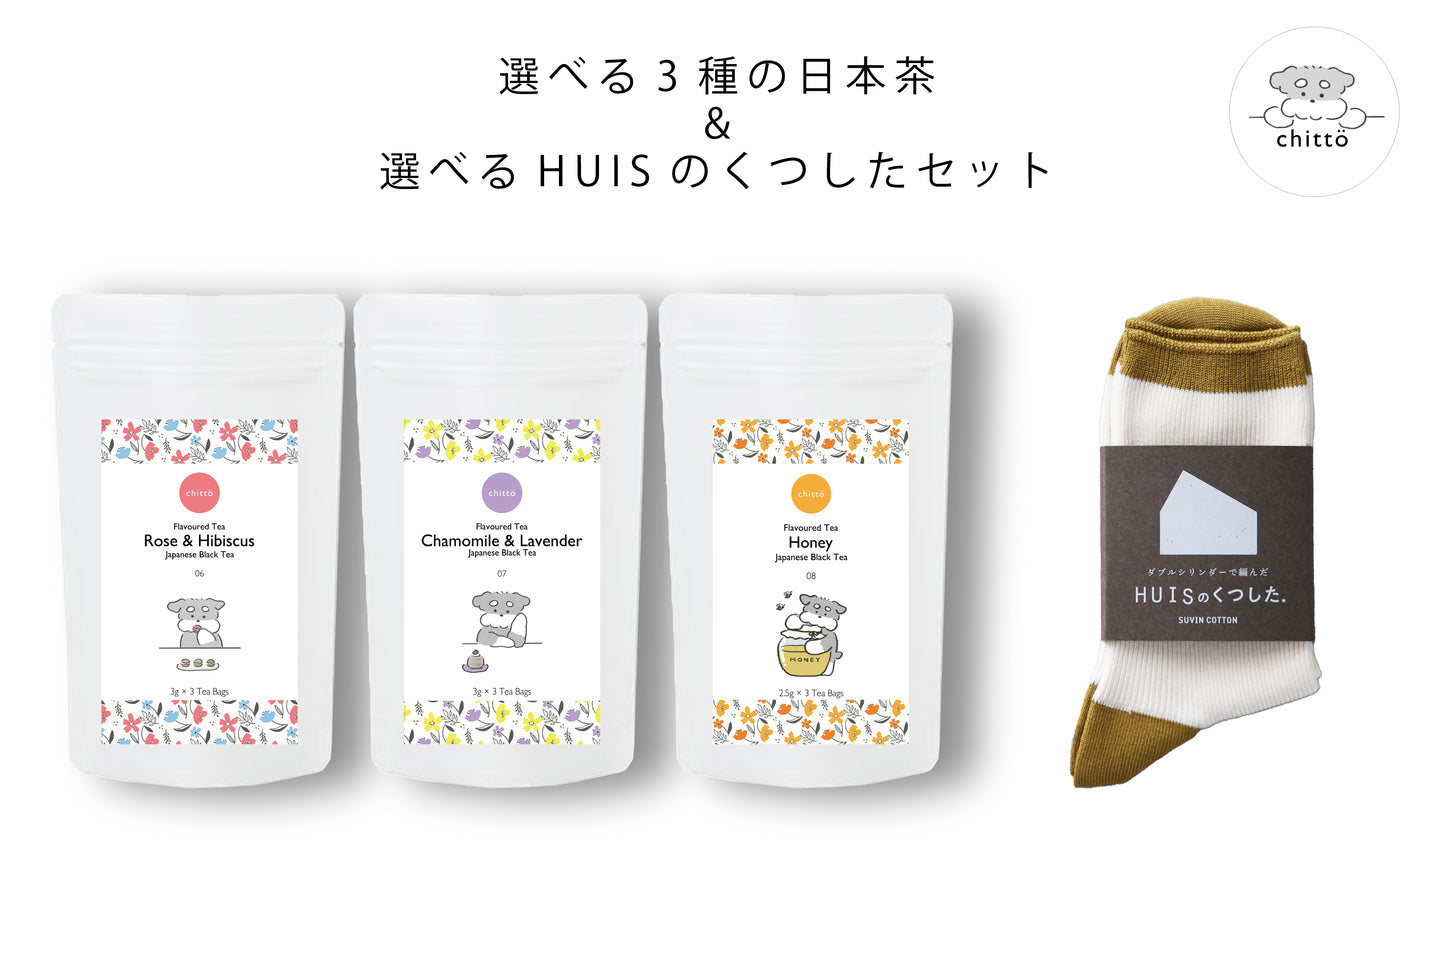 Choose from 3 types of JAPANESE TEA &amp; HUIS "Cream" gift set with Dogs. Series (Schnauzer)